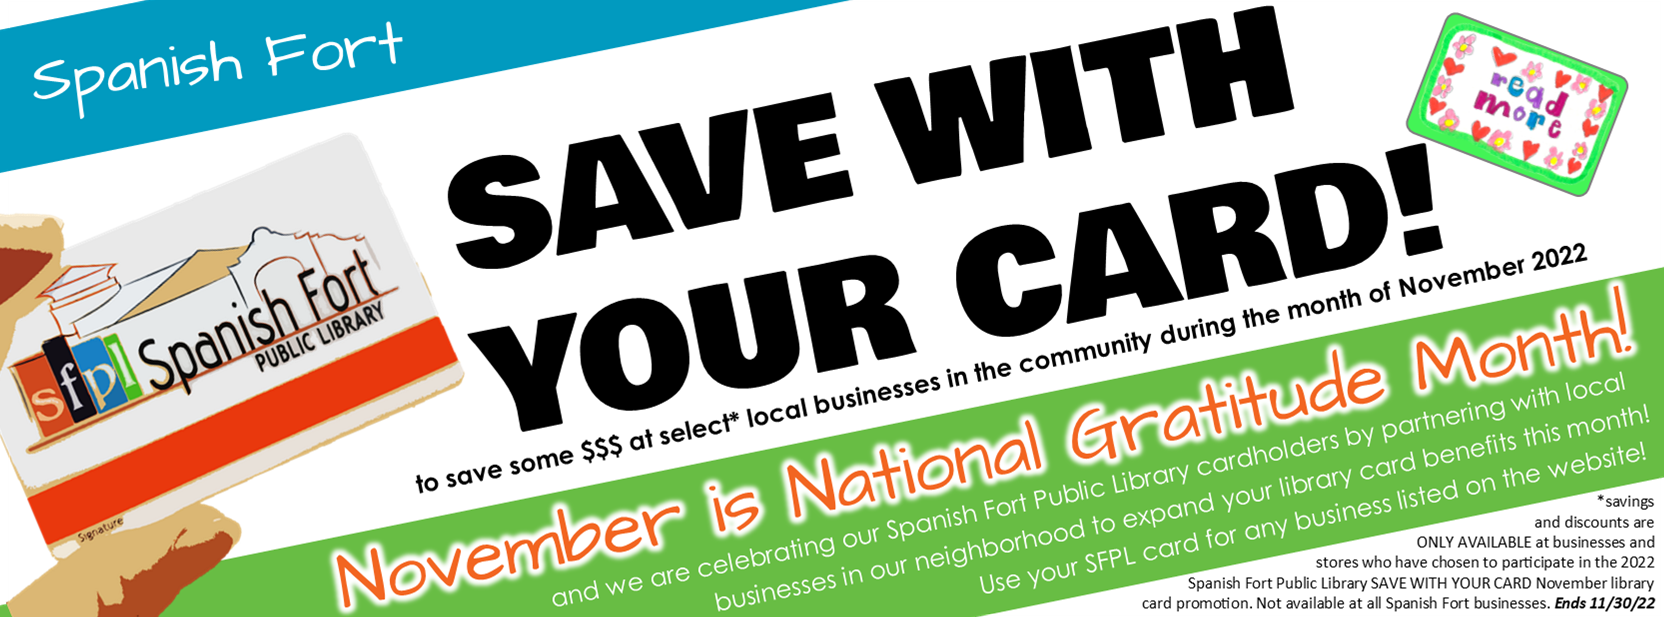 SAVE WITH YOUR CARD! Save some $$$ at select* local businesses in the community during the month of November 2022 November is National Gratitude Month and we are celebrating our Spanish Fort Public Library cardholders by partnering with local                        businesses in our neighborhood to expand your library card benefits this month!  Use your SFPL card for any business listed on the website! *savings and discounts are ONLY AVAILABLE at businesses and  stores who have chosen to participate in the 2022 Spanish Fort Public Library SAVE WITH YOUR CARD November library card promotion. Not available at all Spanish Fort businesses. Ends 11/30/22